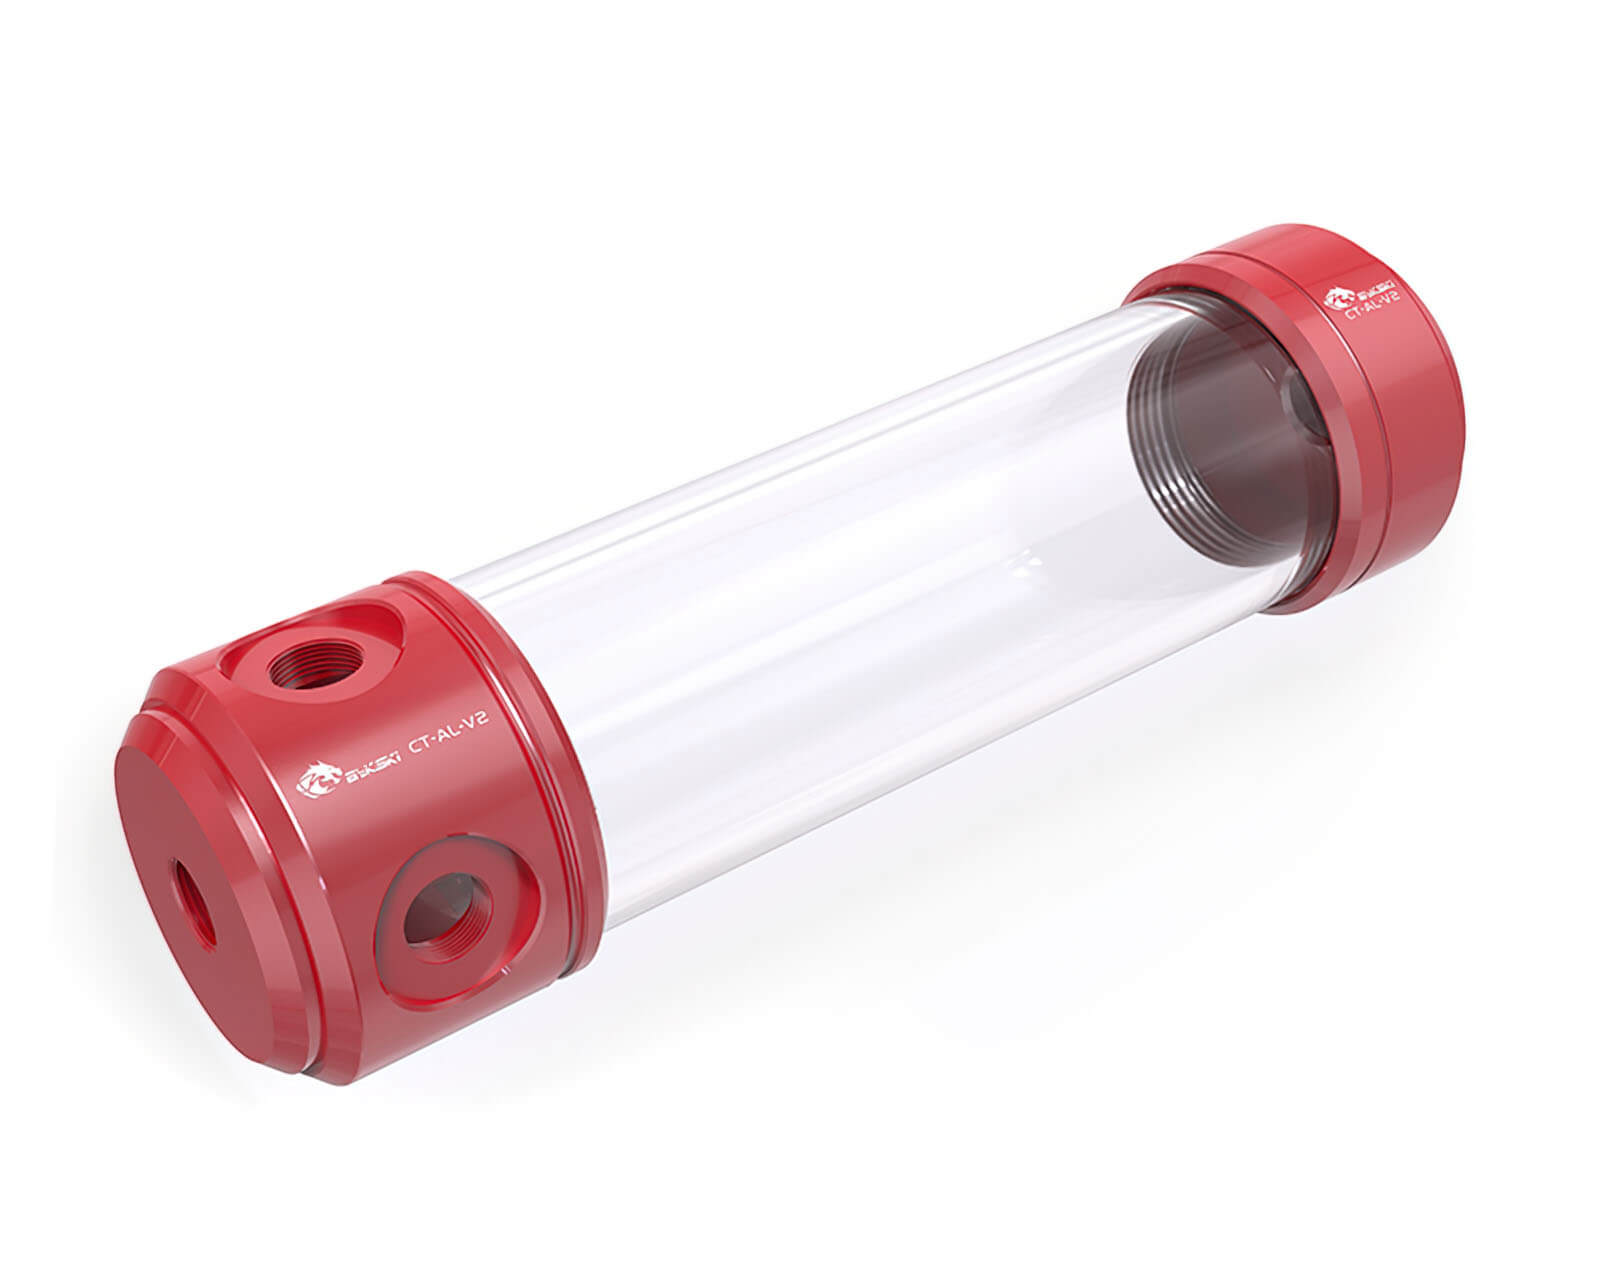 Bykski 50mm Anodized Aluminum Cylindrical Reservoir - 200mm (CT-AL-V2) - PrimoChill - KEEPING IT COOL Red